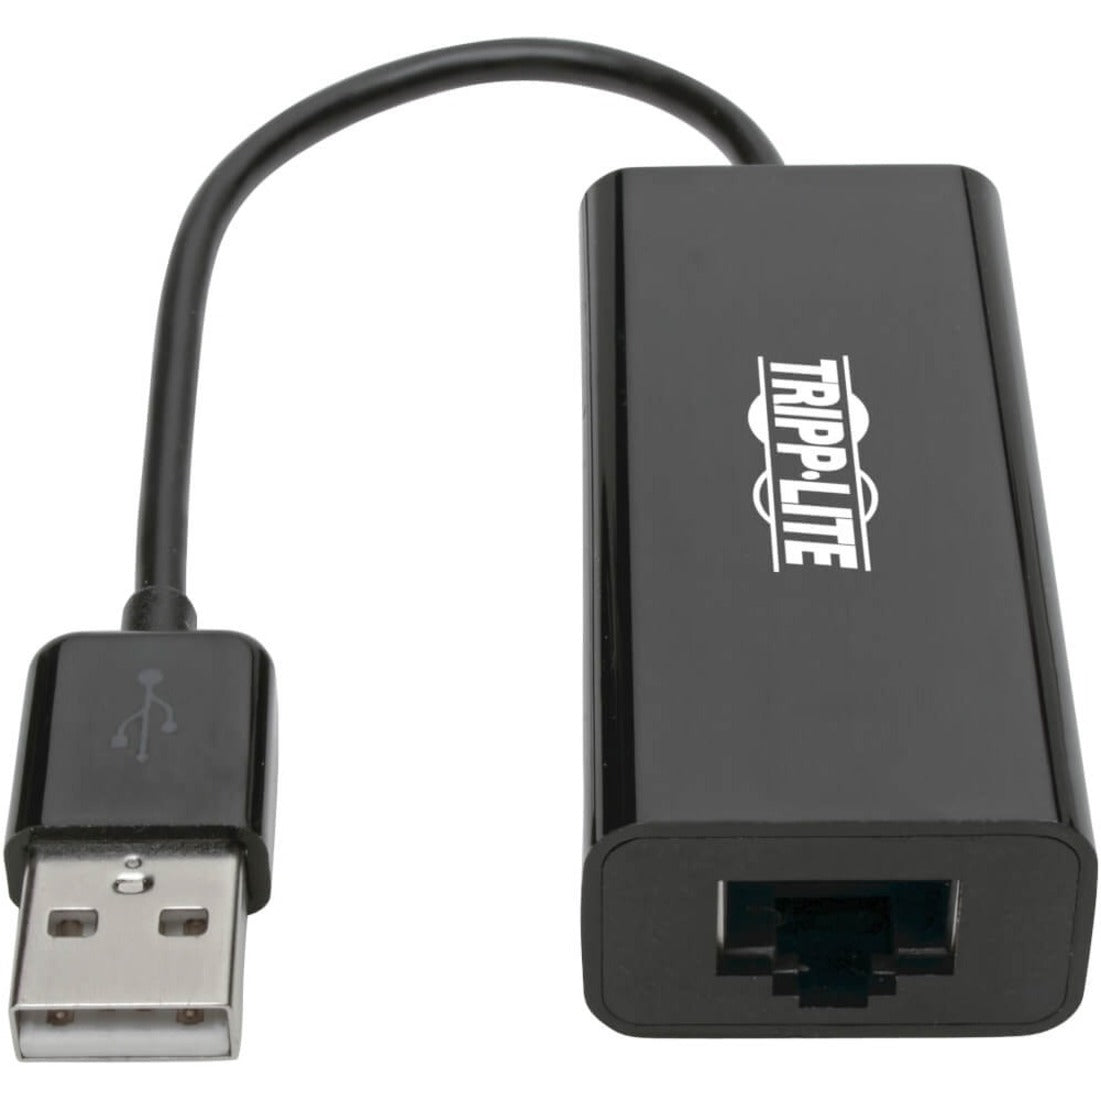 Tripp Lite U236-000-R USB 2.0 to Ethernet Adapter, 10/100 Mbps, Easy Network Connection